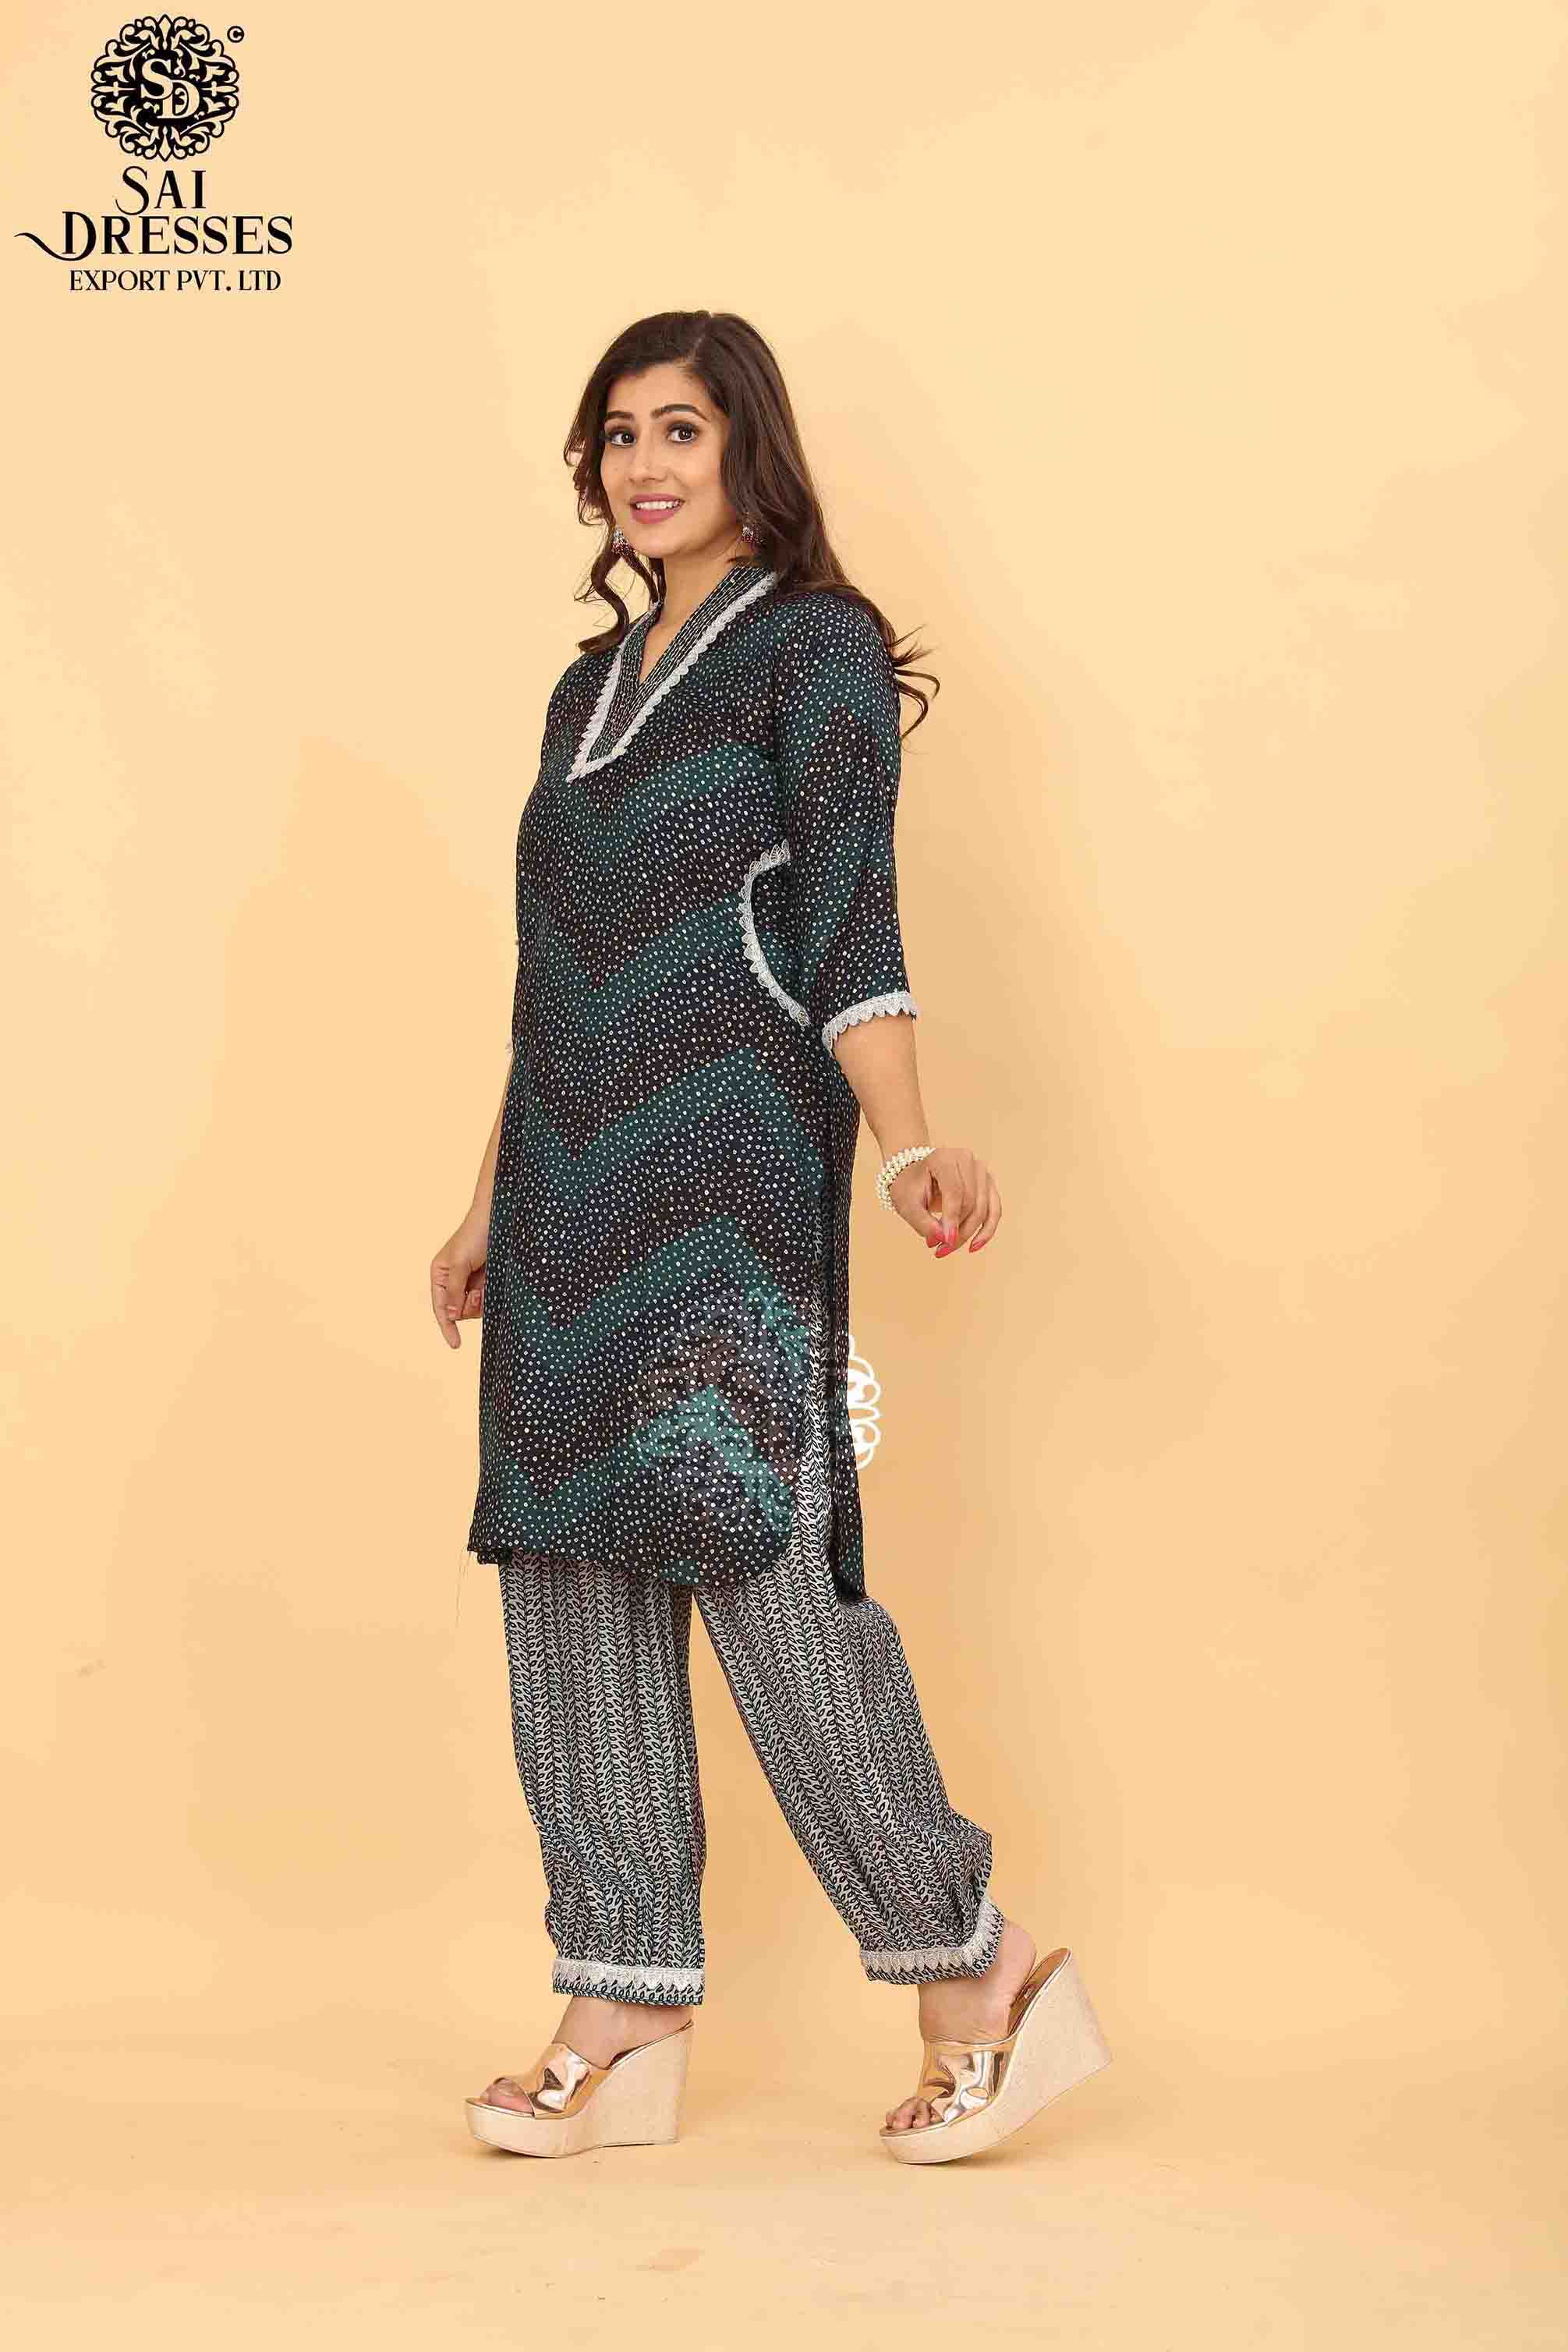 SAI DRESSES PRESENT D.NO SD 5020 READY TO EXCLUSIVE TRENDY WEAR PATHANI KURTA WITH AFGHANI PANT STYLE COMBO COLLECTION IN WHOLESALE RATE IN SURAT